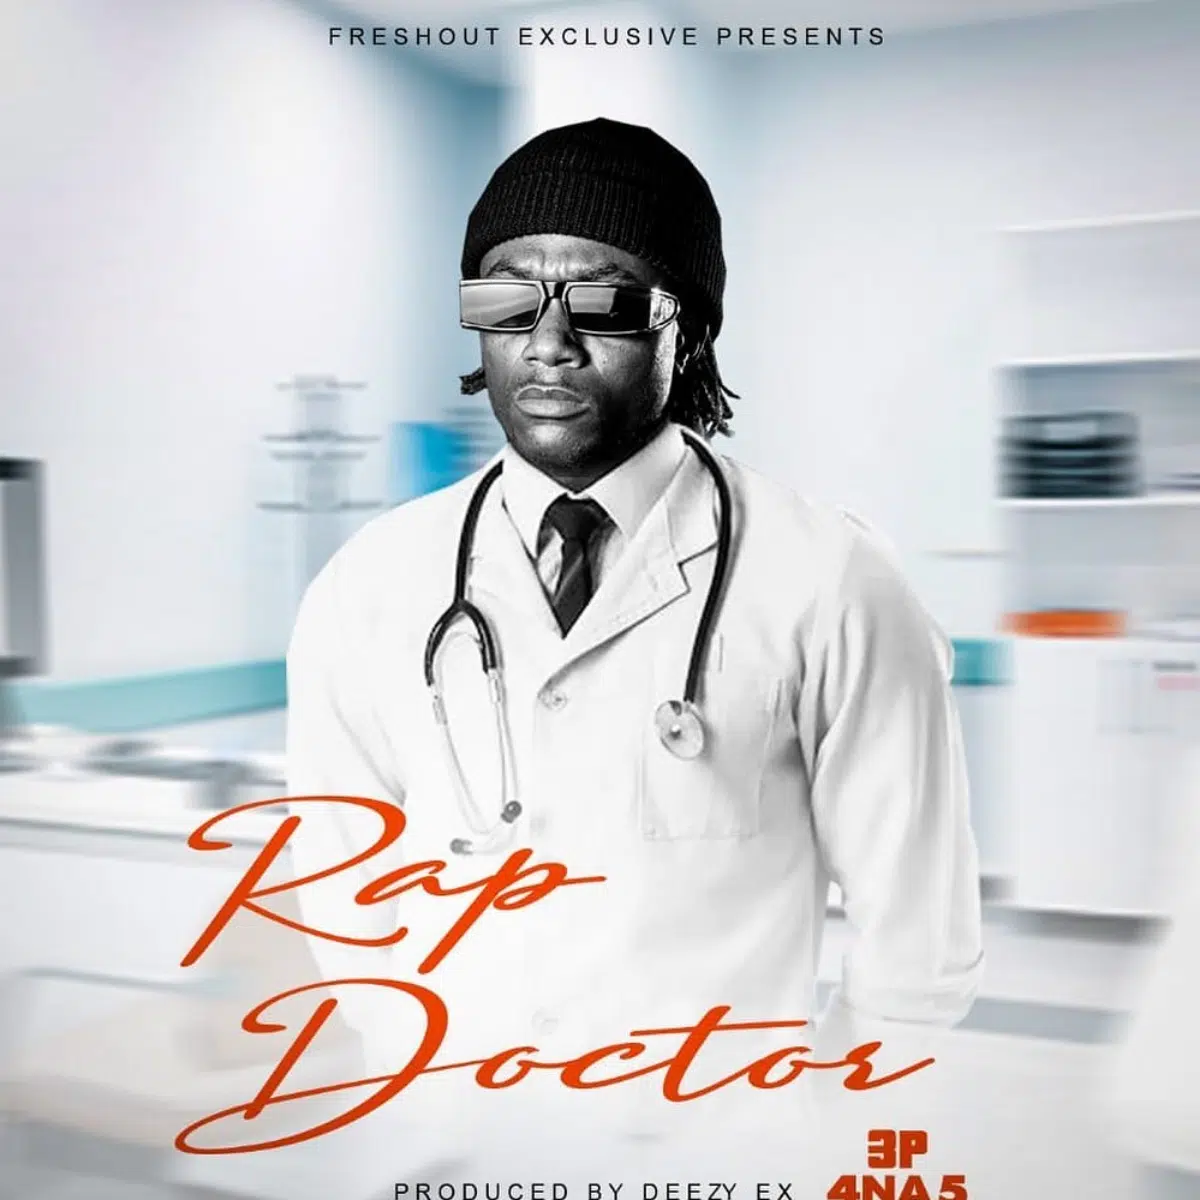 DOWNLOAD: 4 Na 5 3p – “Rap Doctor” Mp3